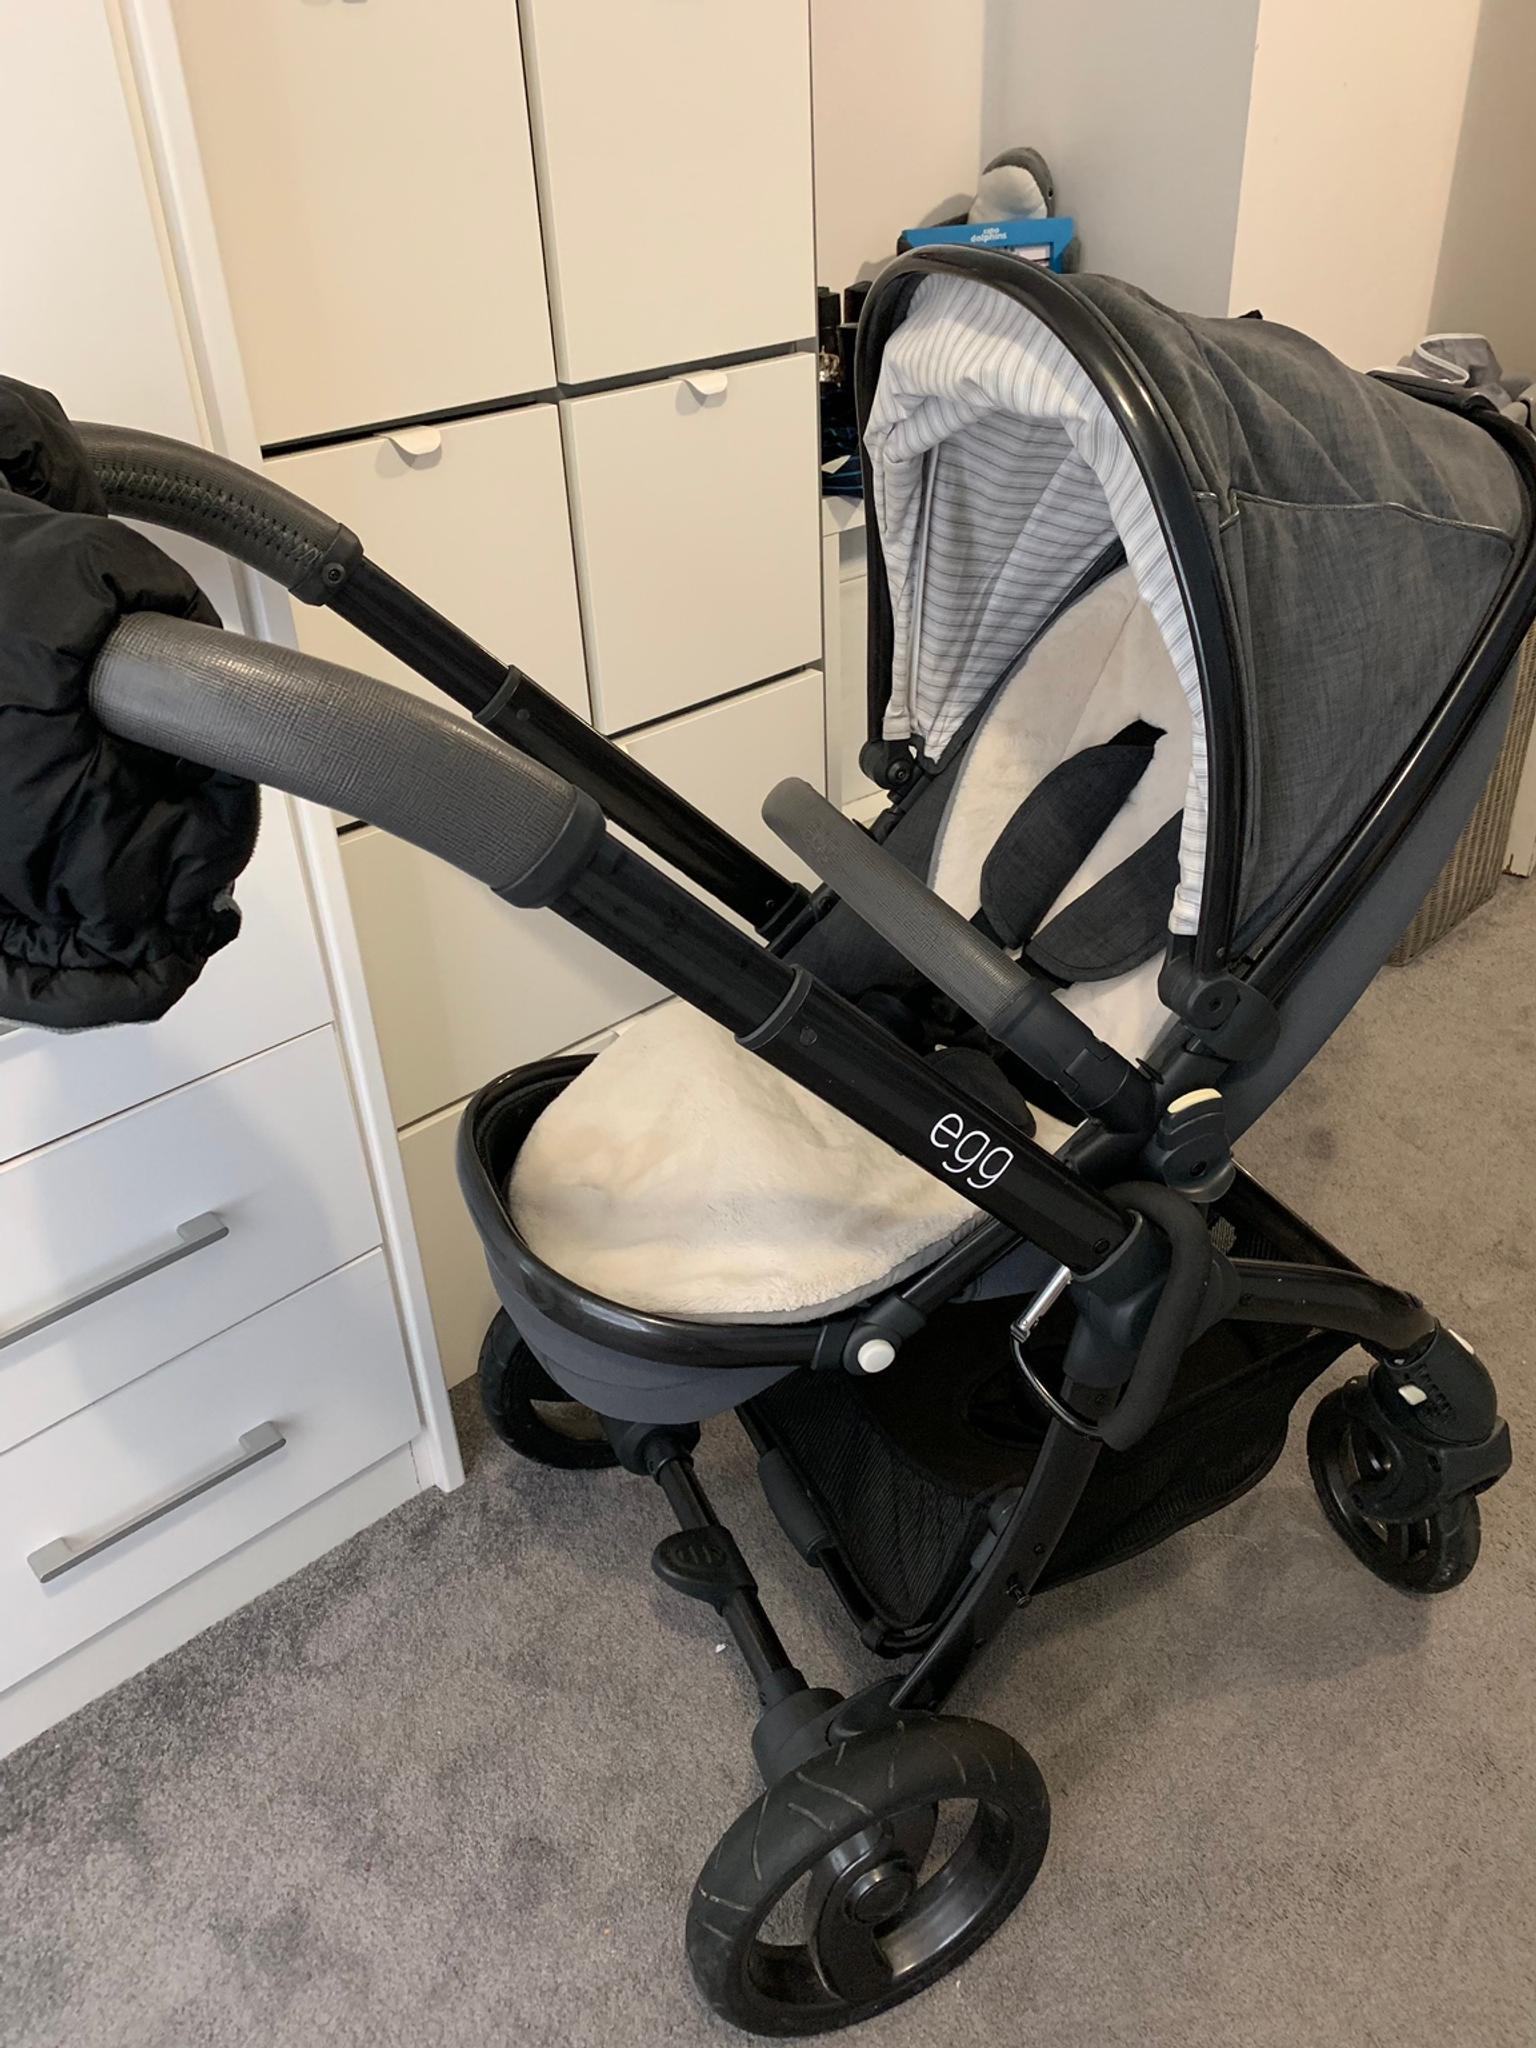 egg stroller replacement parts